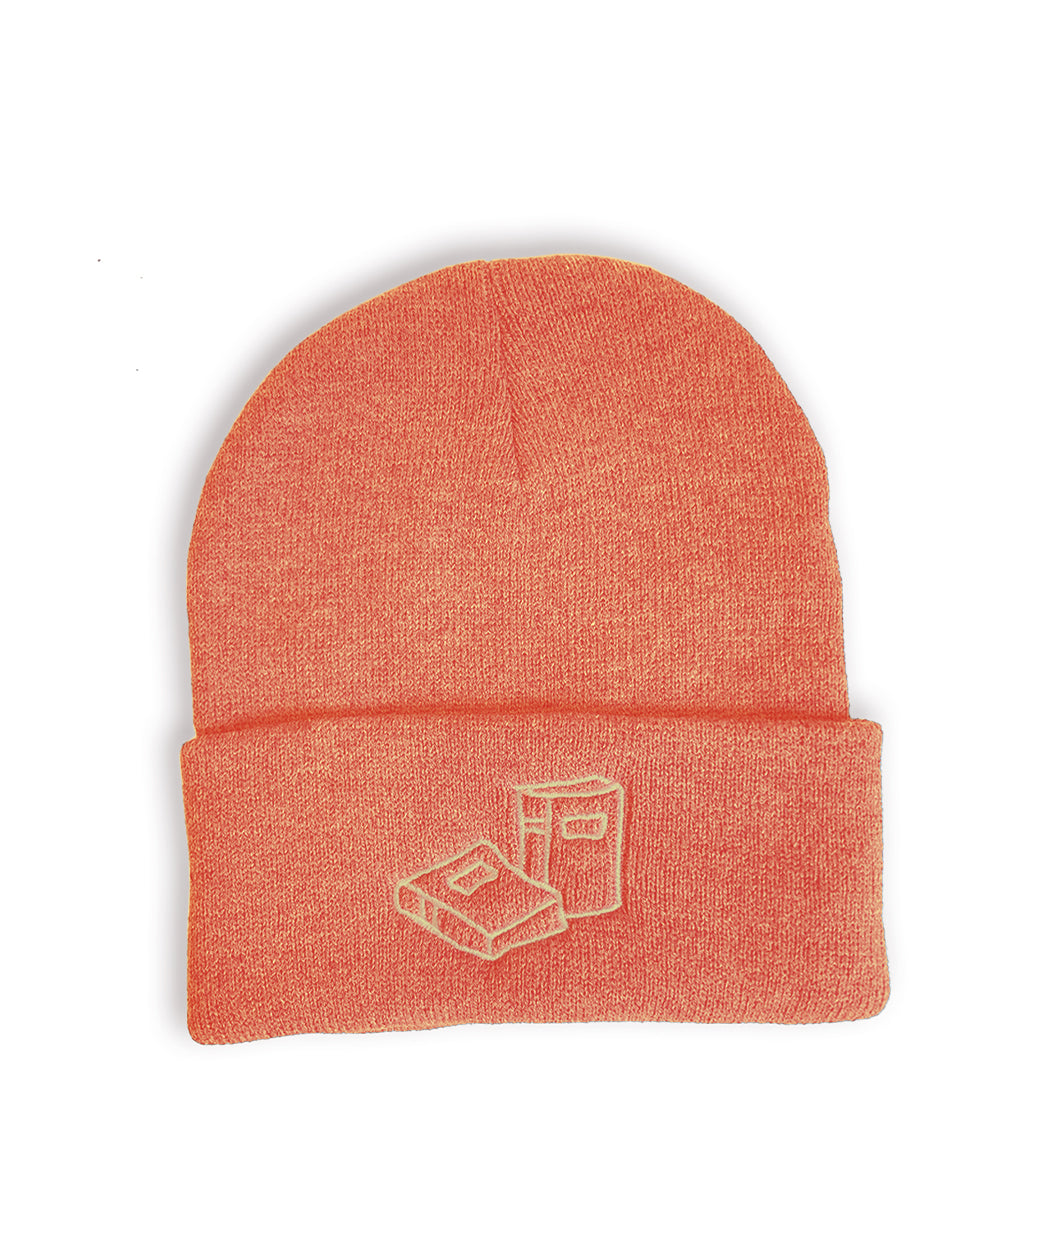 The Heather Orange version of the Books Beanie embroidered with two books on the front of the cuff.